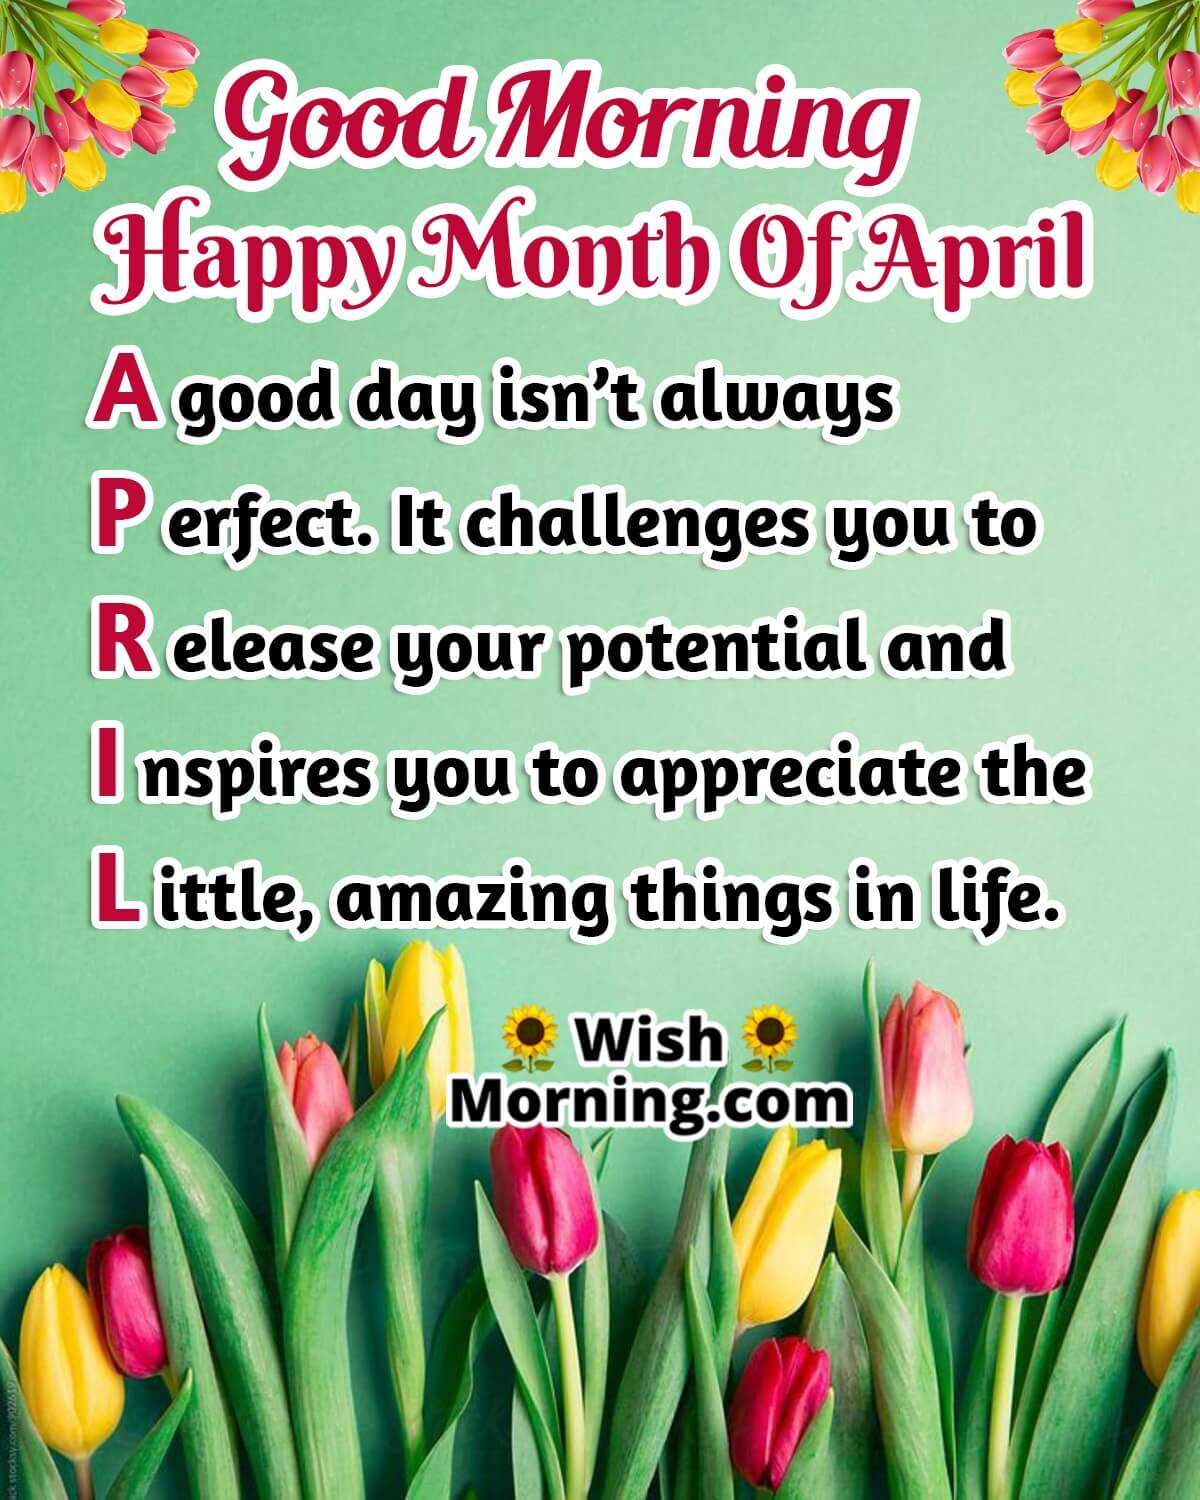 Good Morning Happy Month Of April